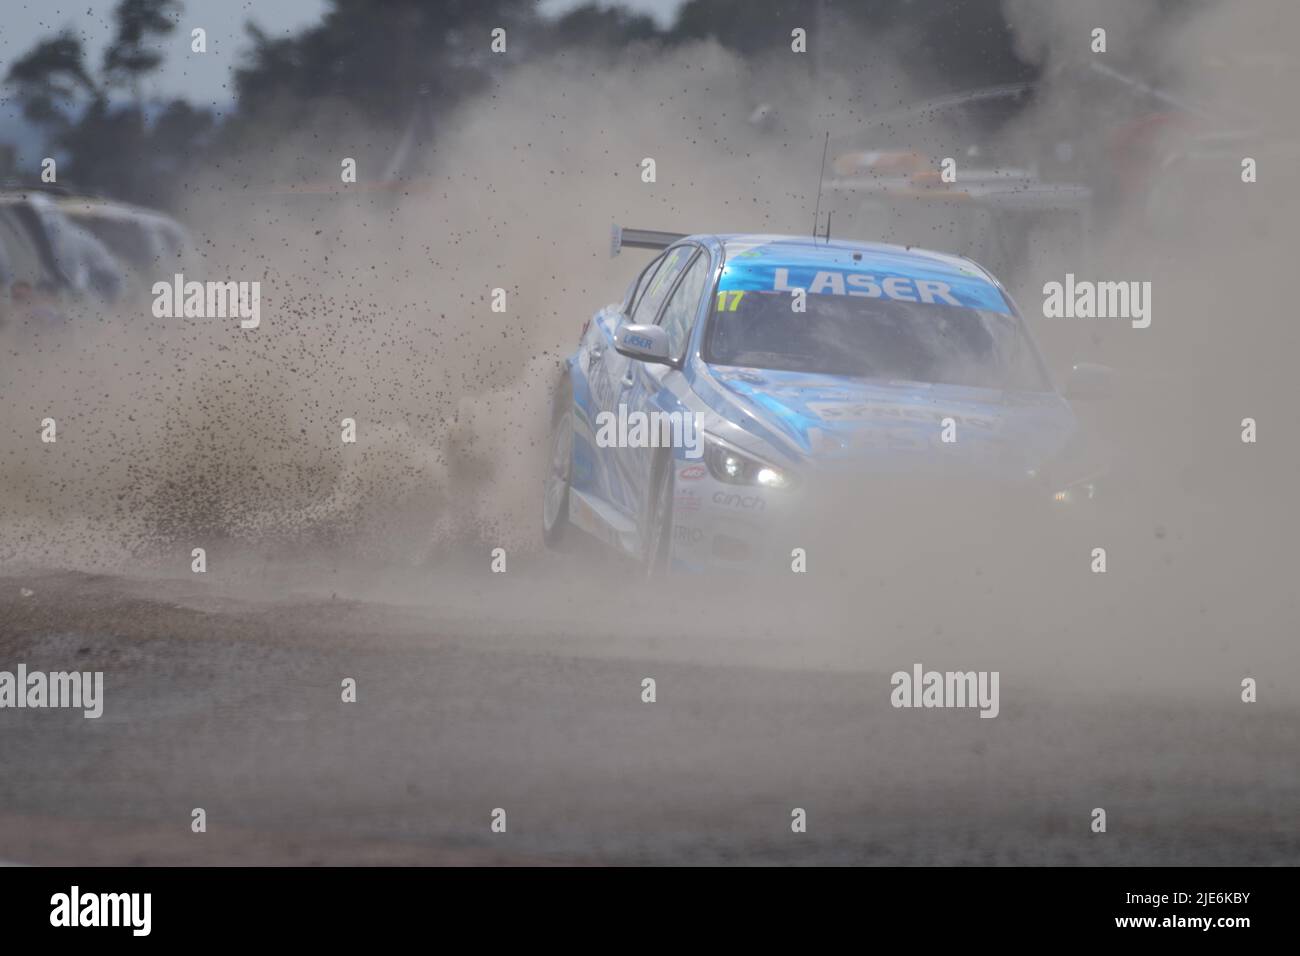 Croft, England, 25 Jun 2022. Dexter Patterson driving an Infiniti for Q50 Laser Tools Racing crashing through the gravel trap during qualifying in the Kwik Fit British Touring Car Championship. Credit: Colin Edwards/Alamy Live News. Stock Photo